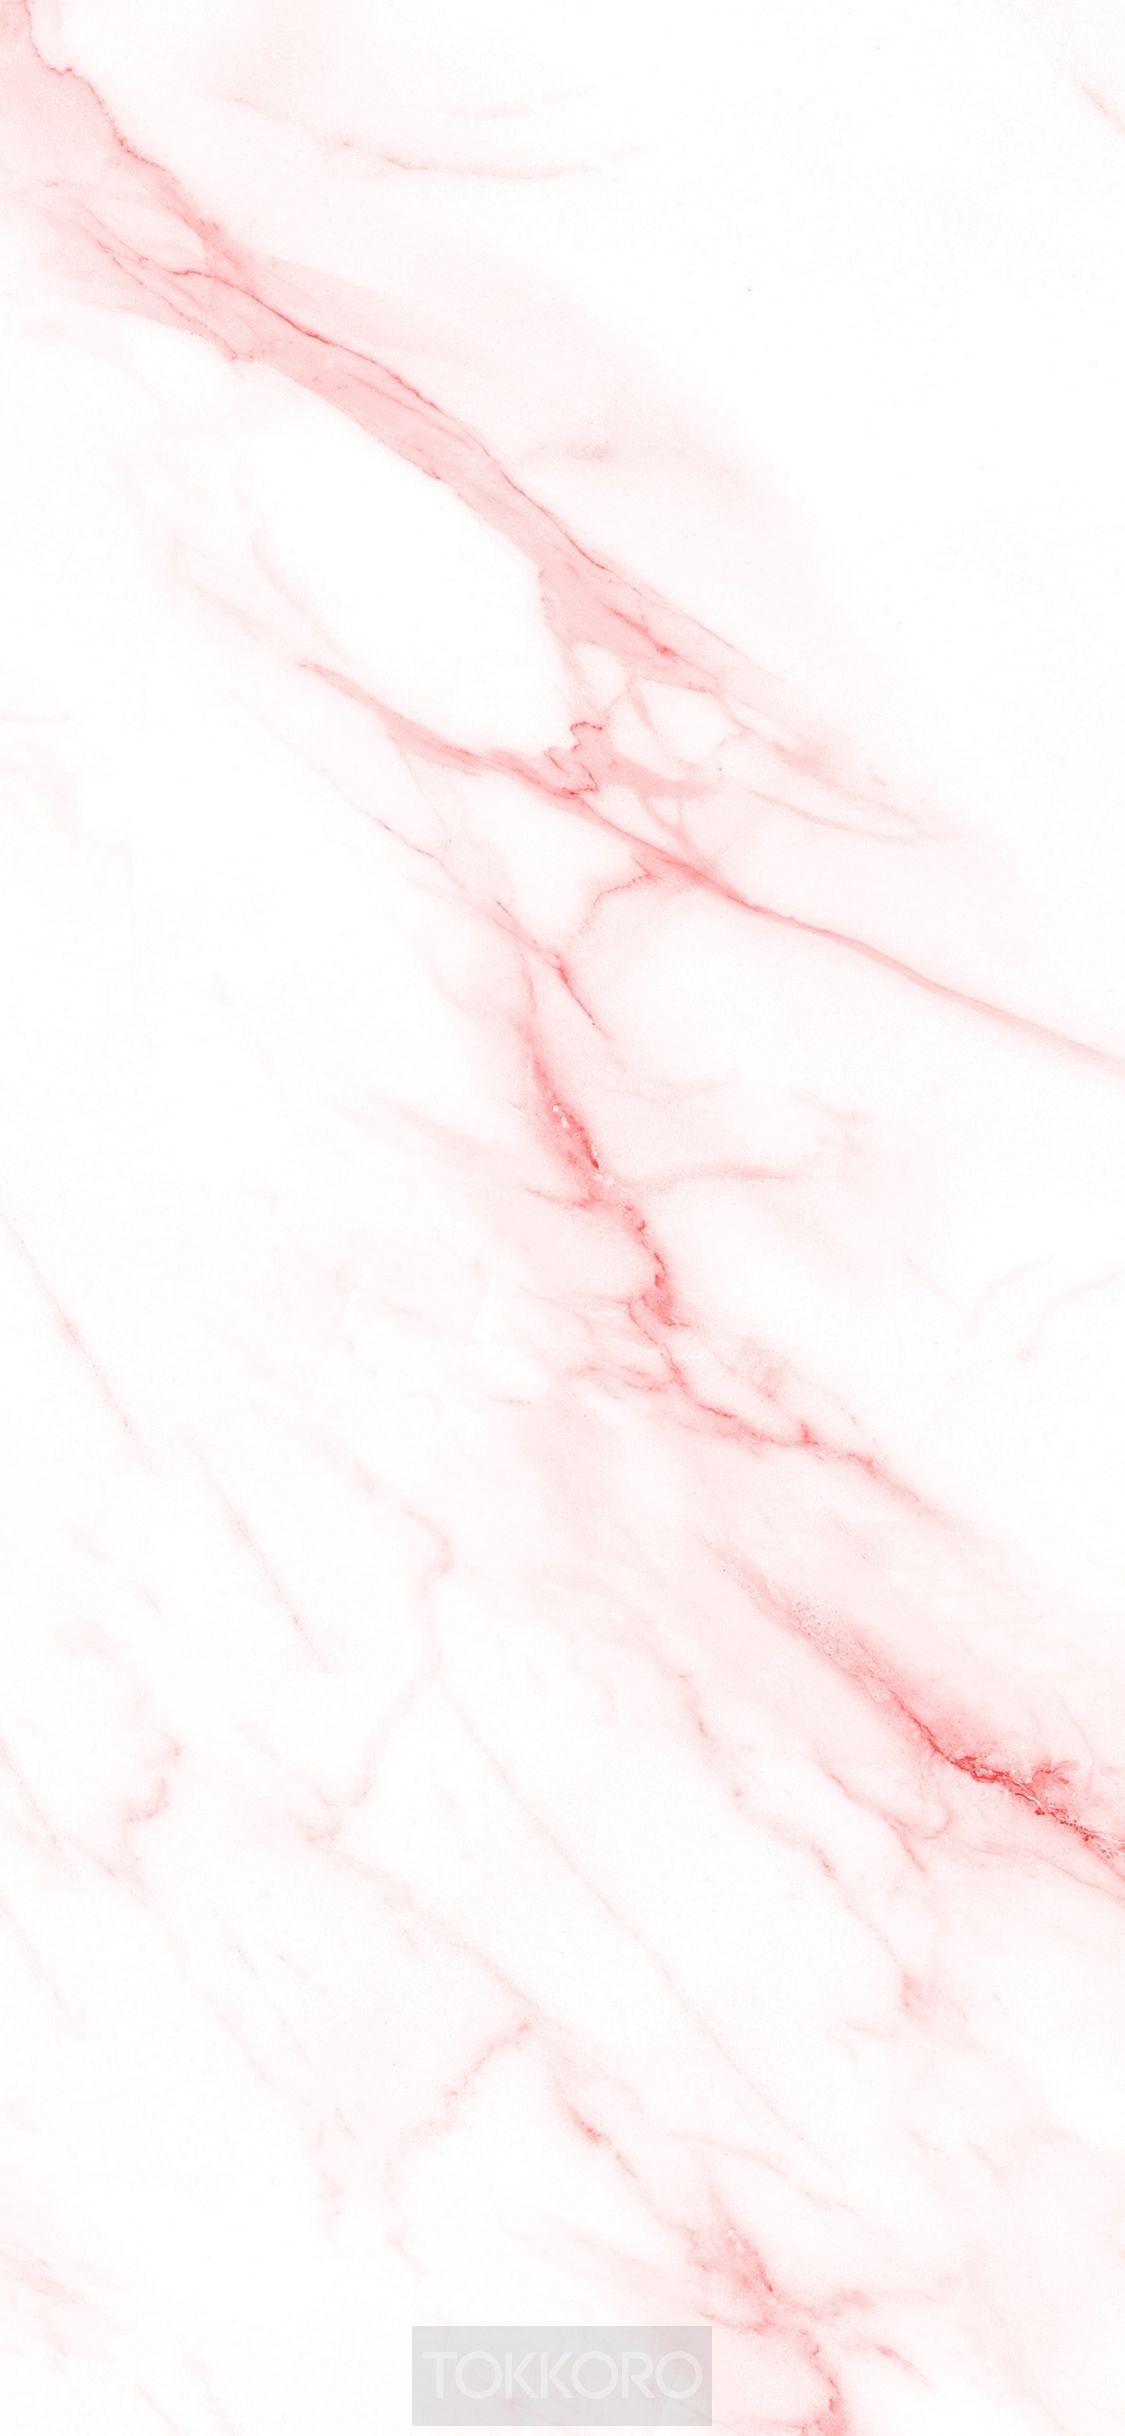 red marble, iPhone 11 Pro wallpaper 1080p, 1125x2436 Gallery HD Wallpaper